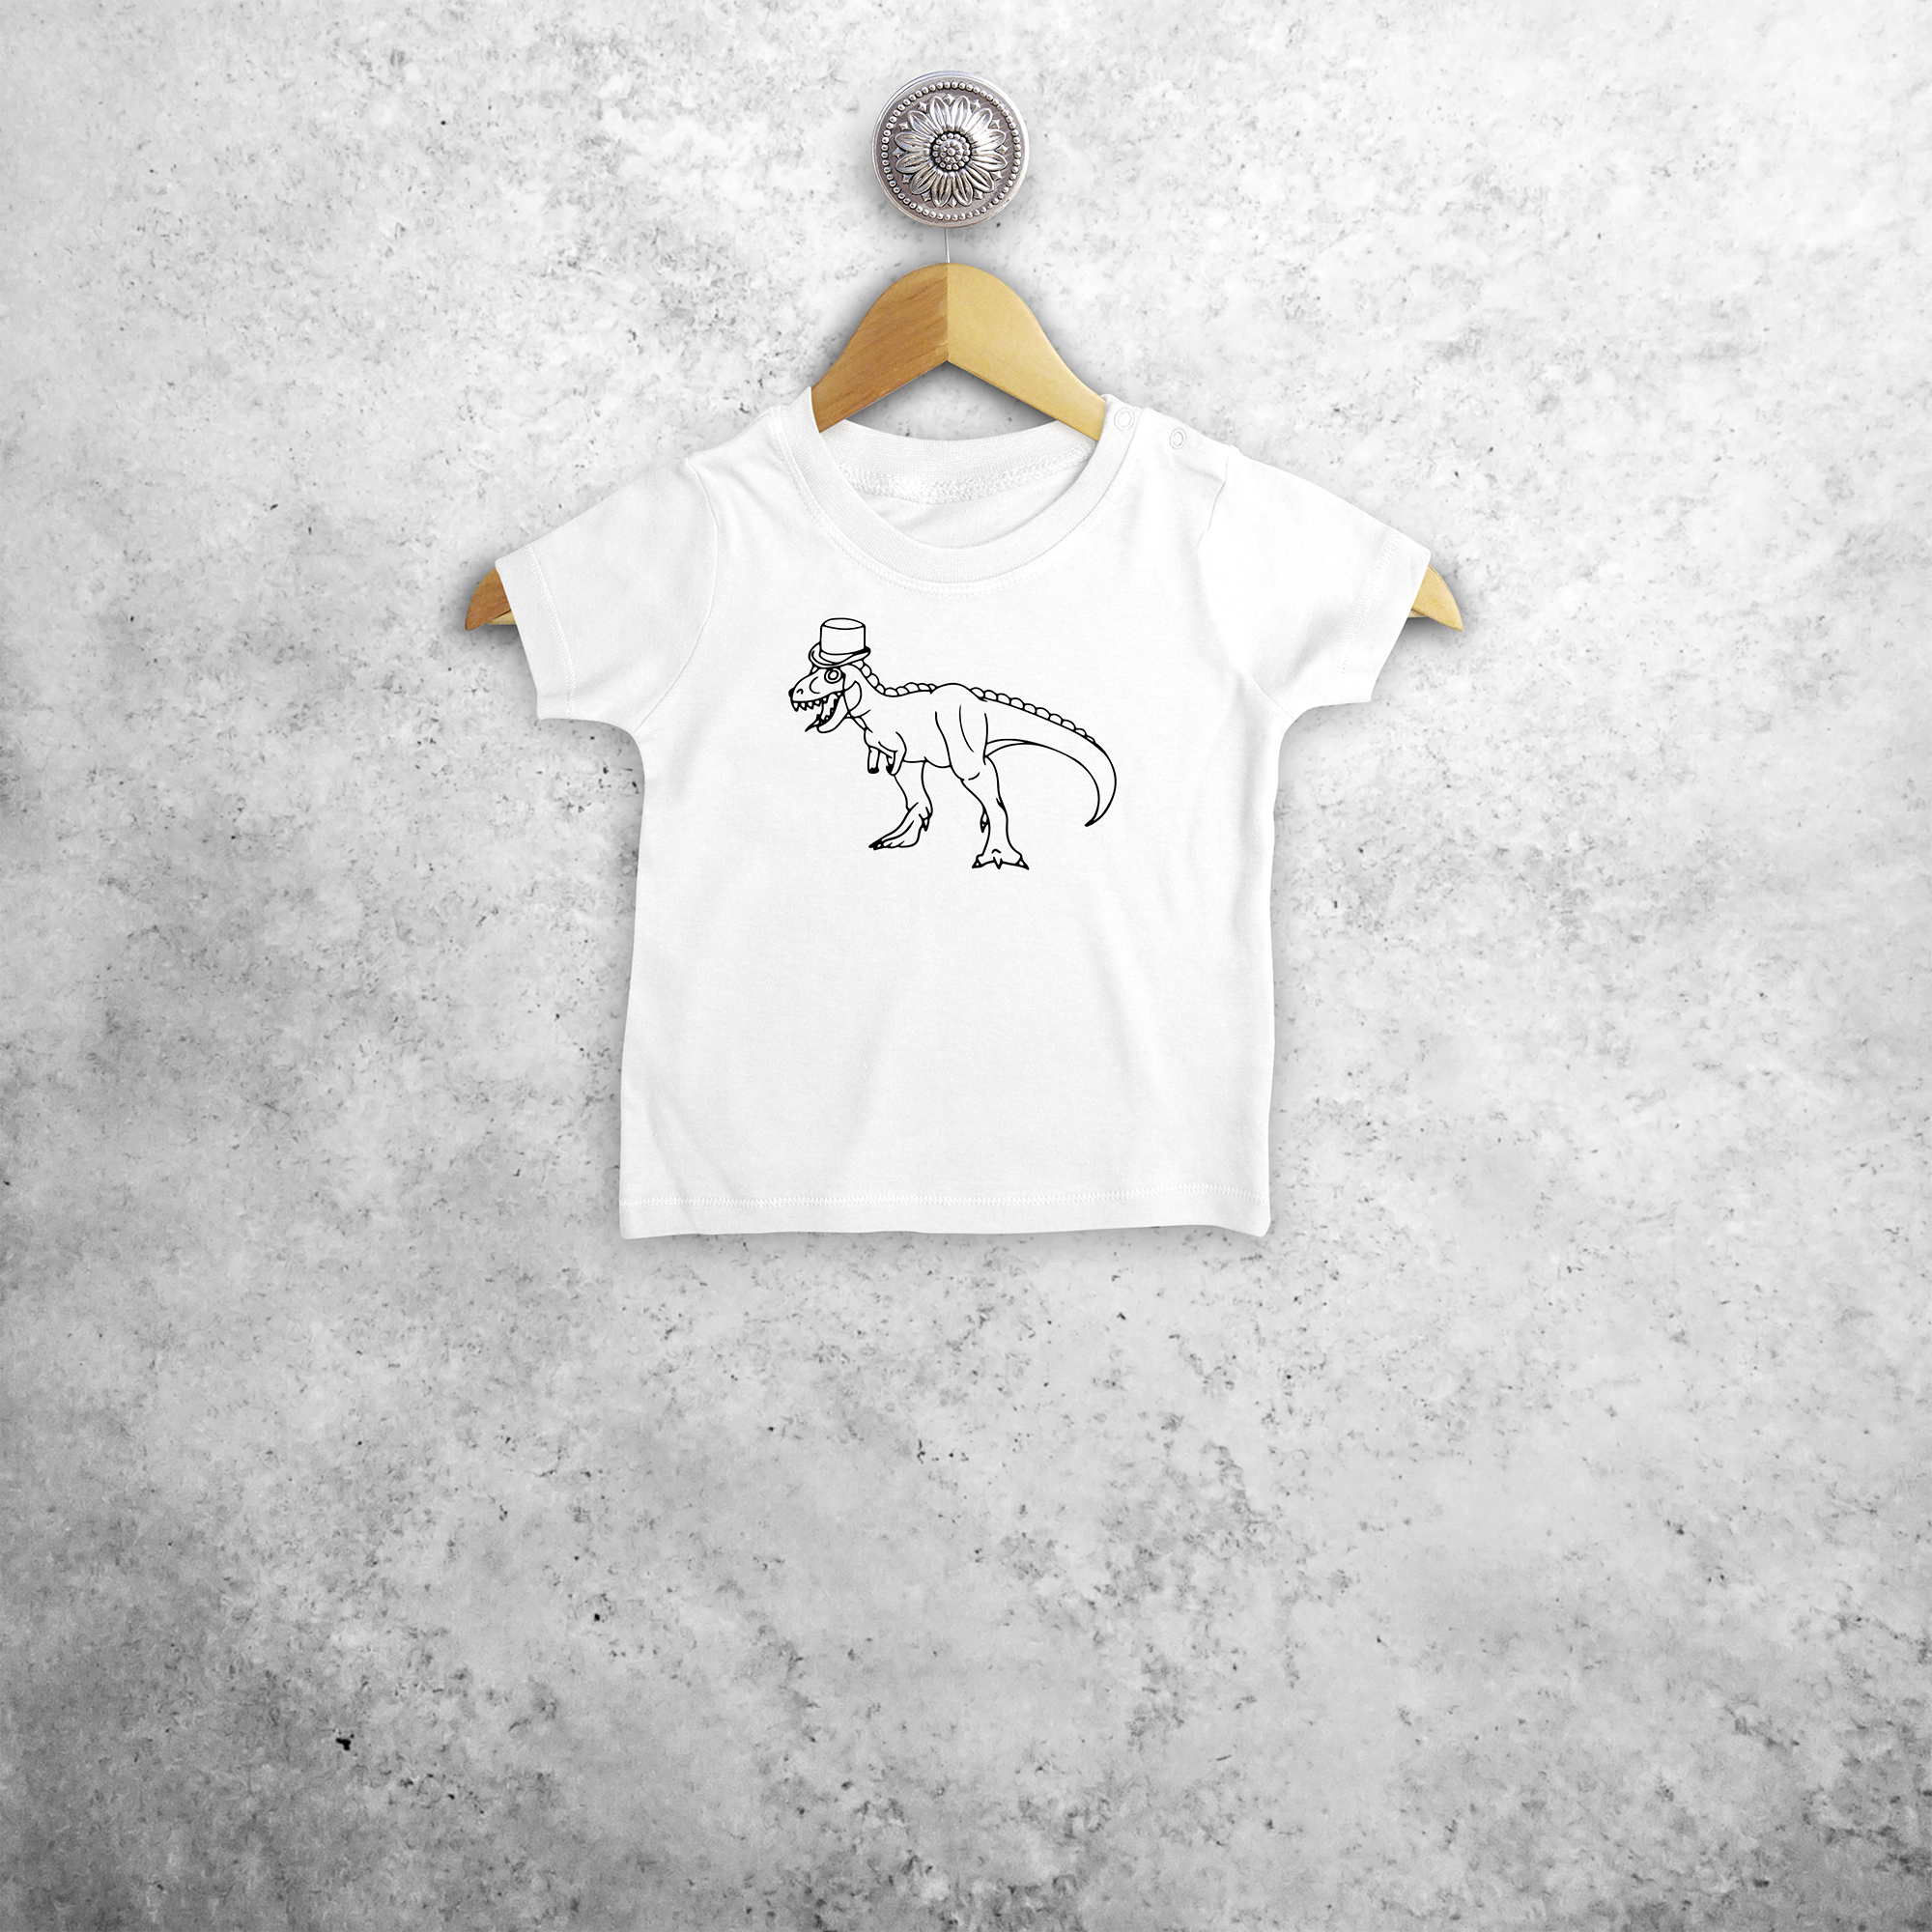 Dino with tophat baby shortsleeve shirt